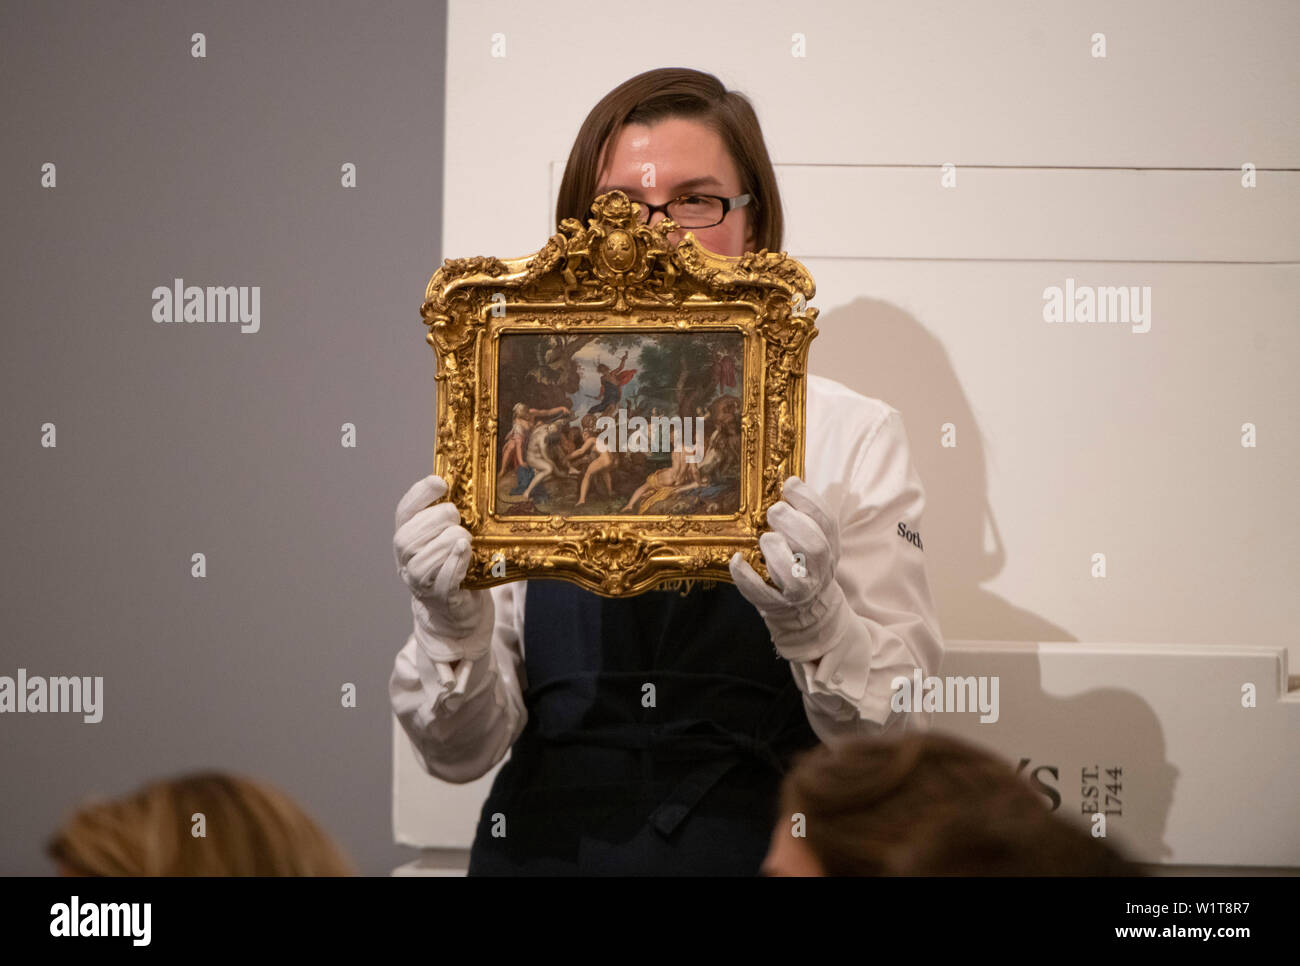 Sotheby’s, London, UK. 3rd July 2019. The summer Old Masters Evening sale offers paintings from the 14th - 19th century by many of the most important painters of Western art. Image: Joachim Antonisz Wtewael, “Diana and Actaeon” sold for £4.6 million - A small scale work intended for personal enjoyment by the most important artist of mythological cabinet pieces painted on copper in the Netherlands. Credit: Malcolm Park/Alamy Live News. Stock Photo